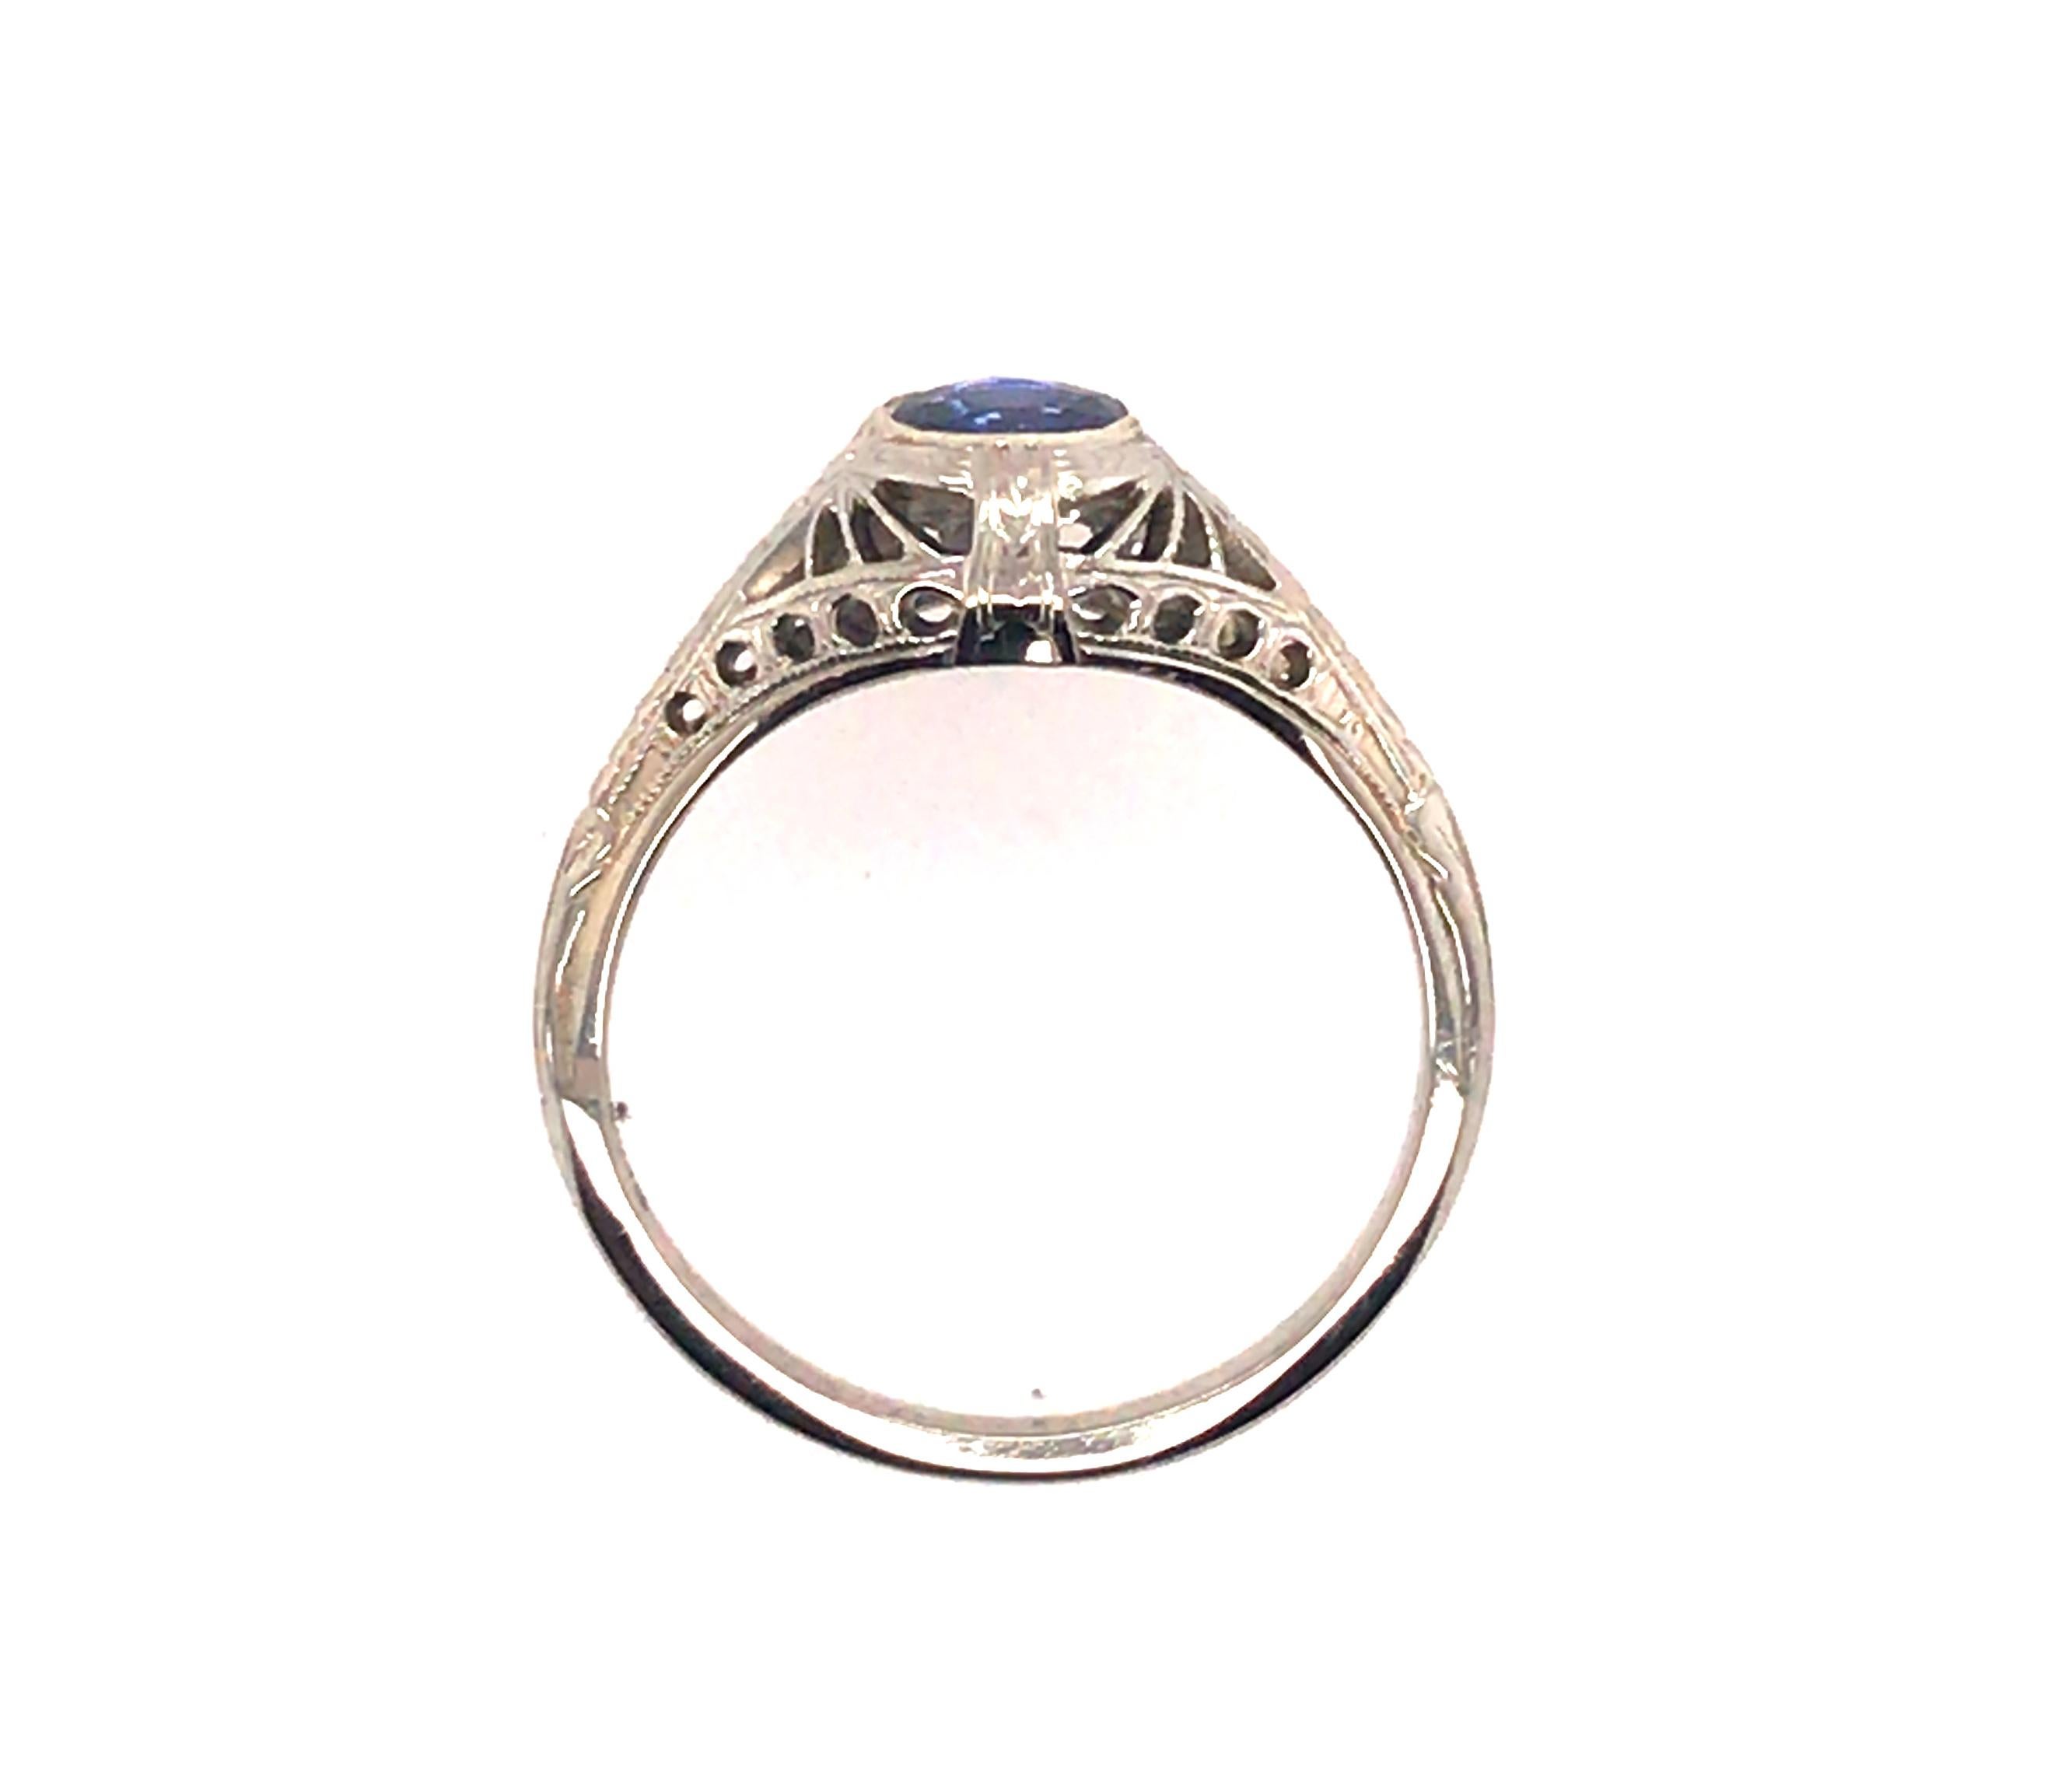 Vintage Antique .50ct Sapphire 18K White Gold Art Deco Engagement Ring


Featuring a Gorgeous .50ct Genuine Natural Blue Round Sapphire Center

Alluring Mounting With Beautiful Details 

Hand Carved Filigree and Milgrain Edges

100% Natural